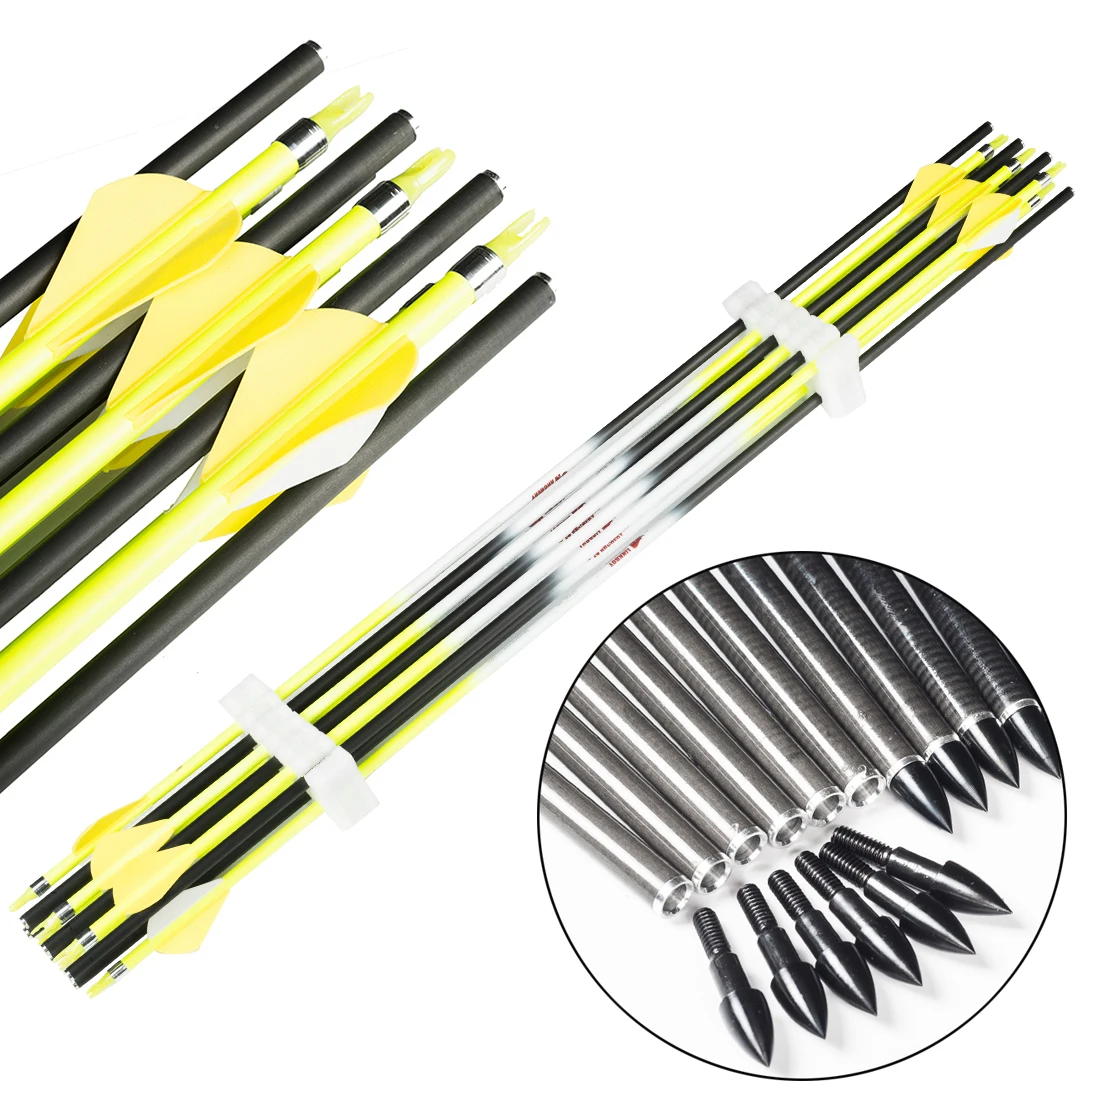 Linkboy Archery Carbon Arrows Spine 300-800 2inch Plastic Vanes Compound Bow Hunting Shooting 12pcs